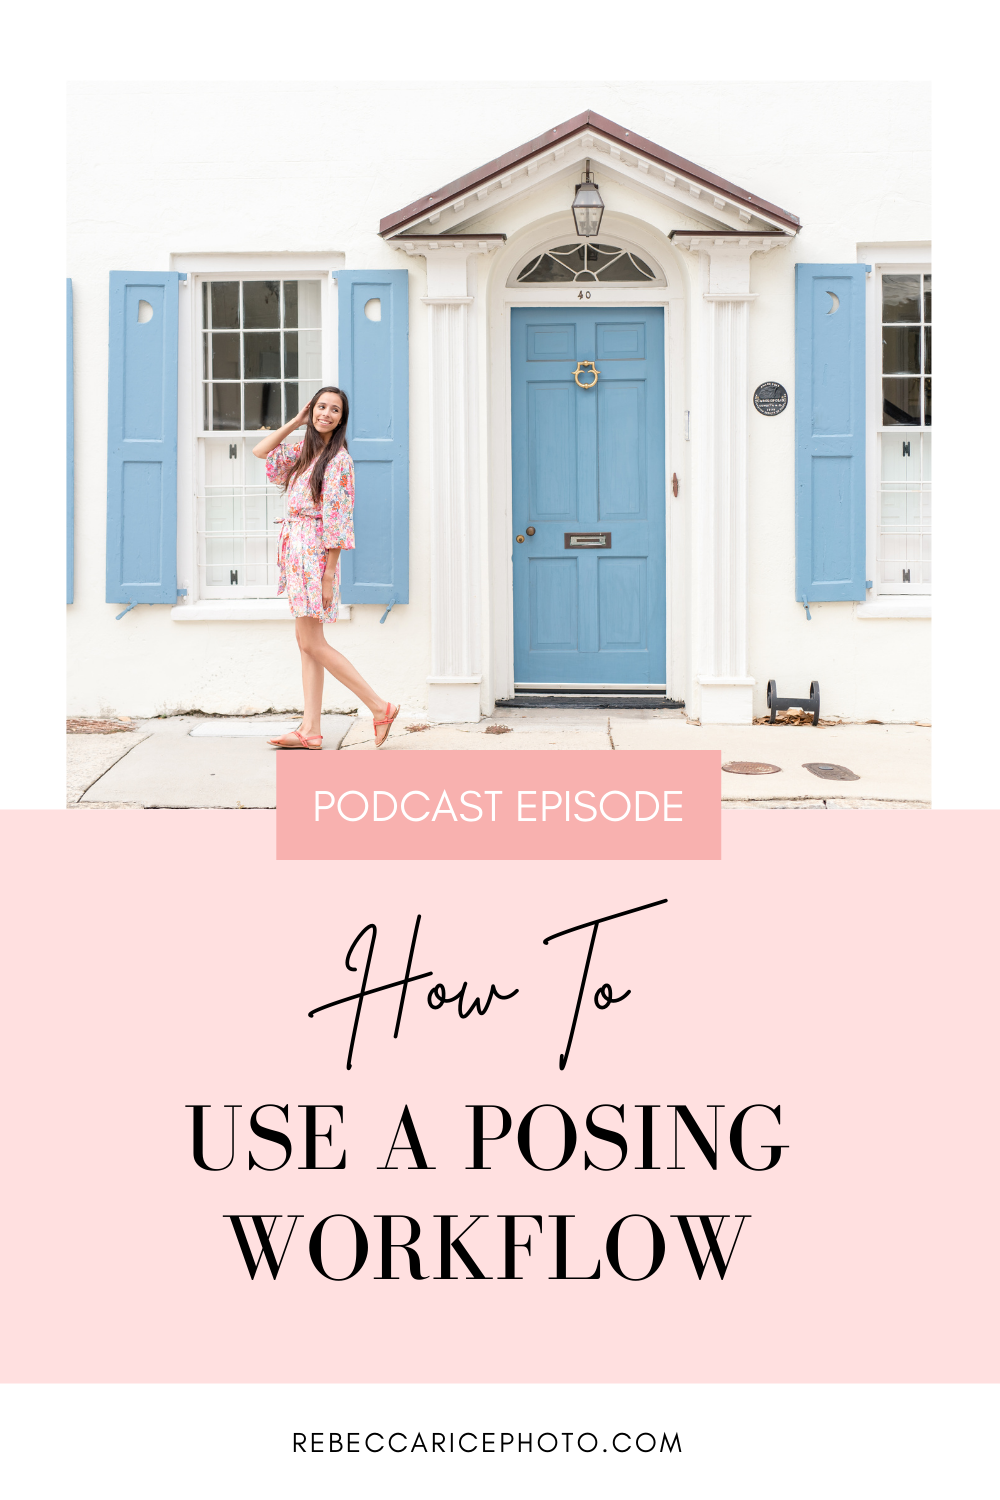 How to Use a Posing Workflow | Family Posing Tips